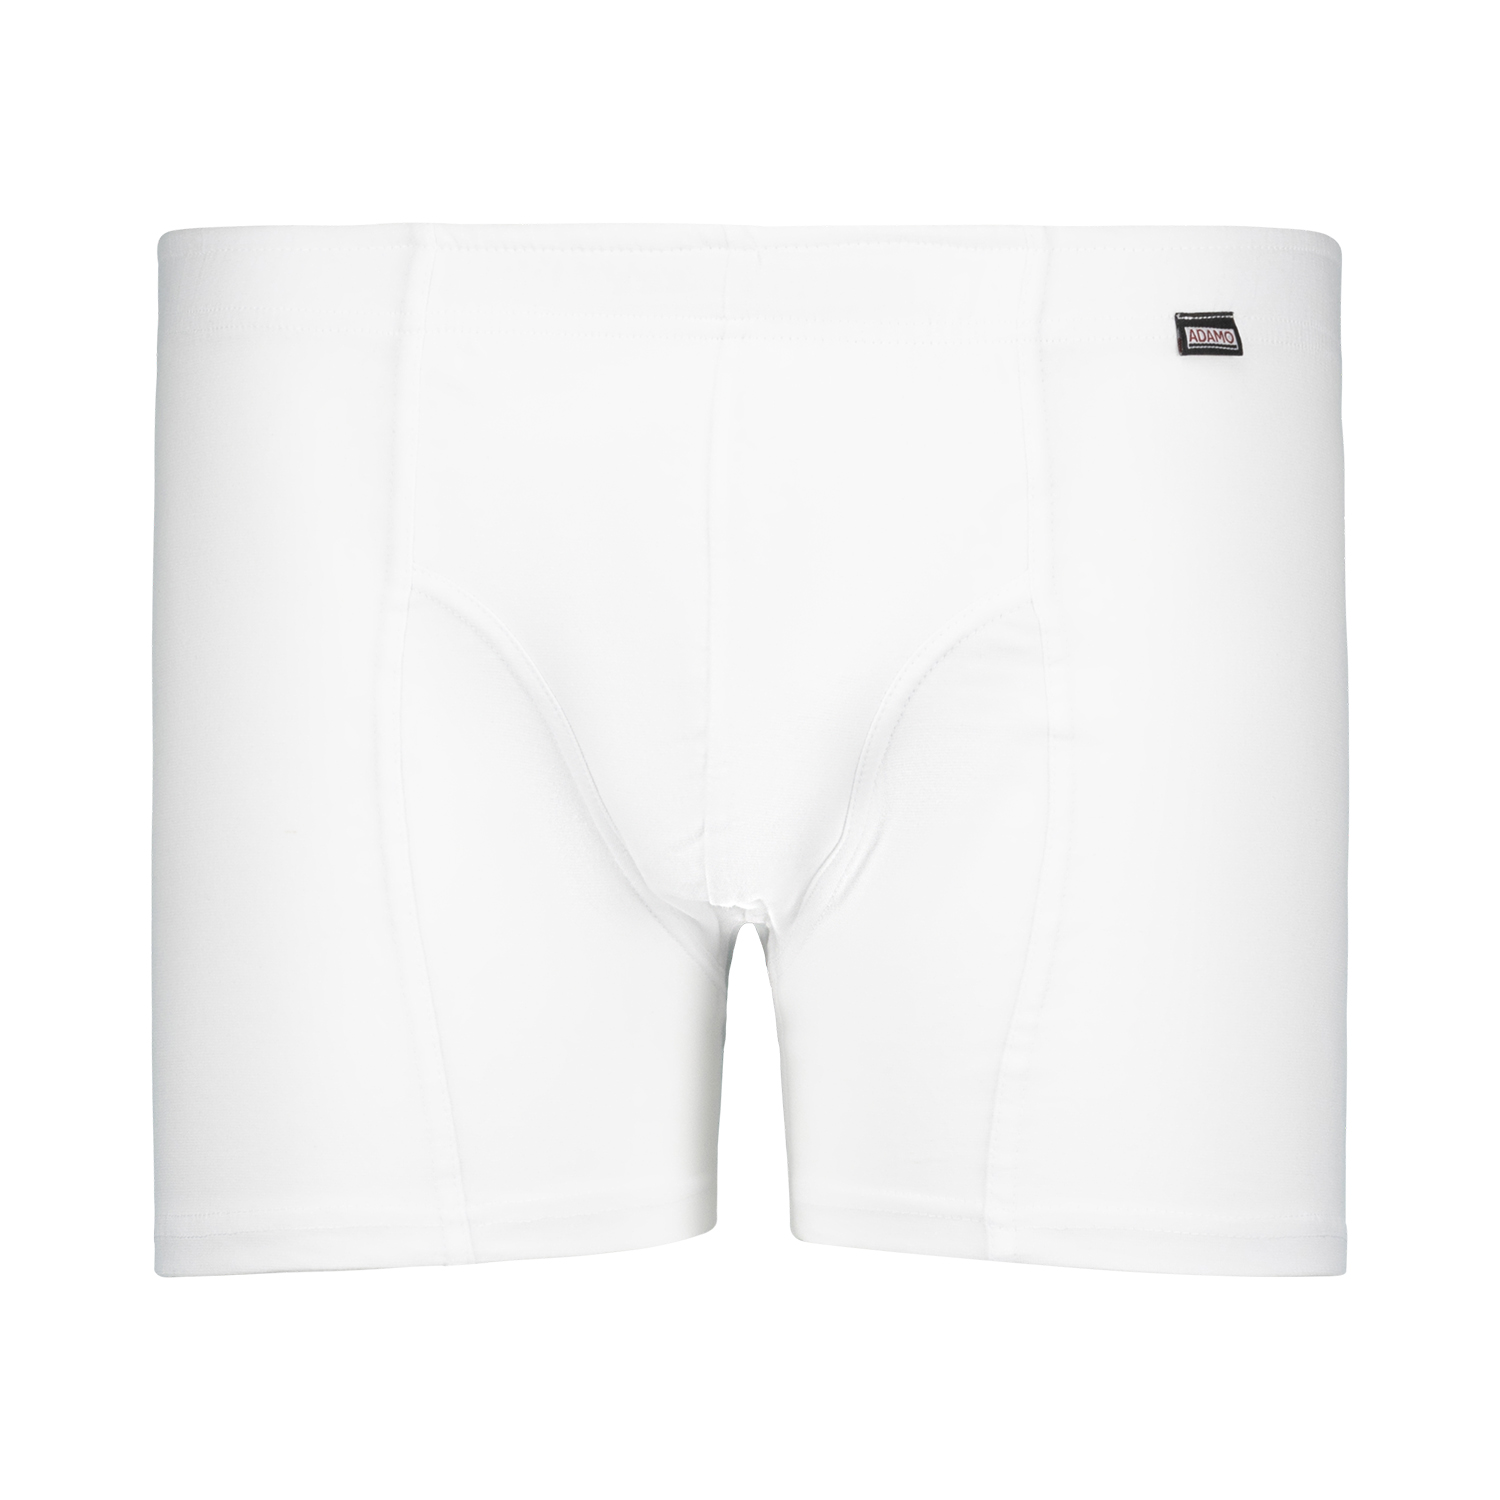 Double pack maxipant "Jack" in white for men by ADAMO up to oversize 20